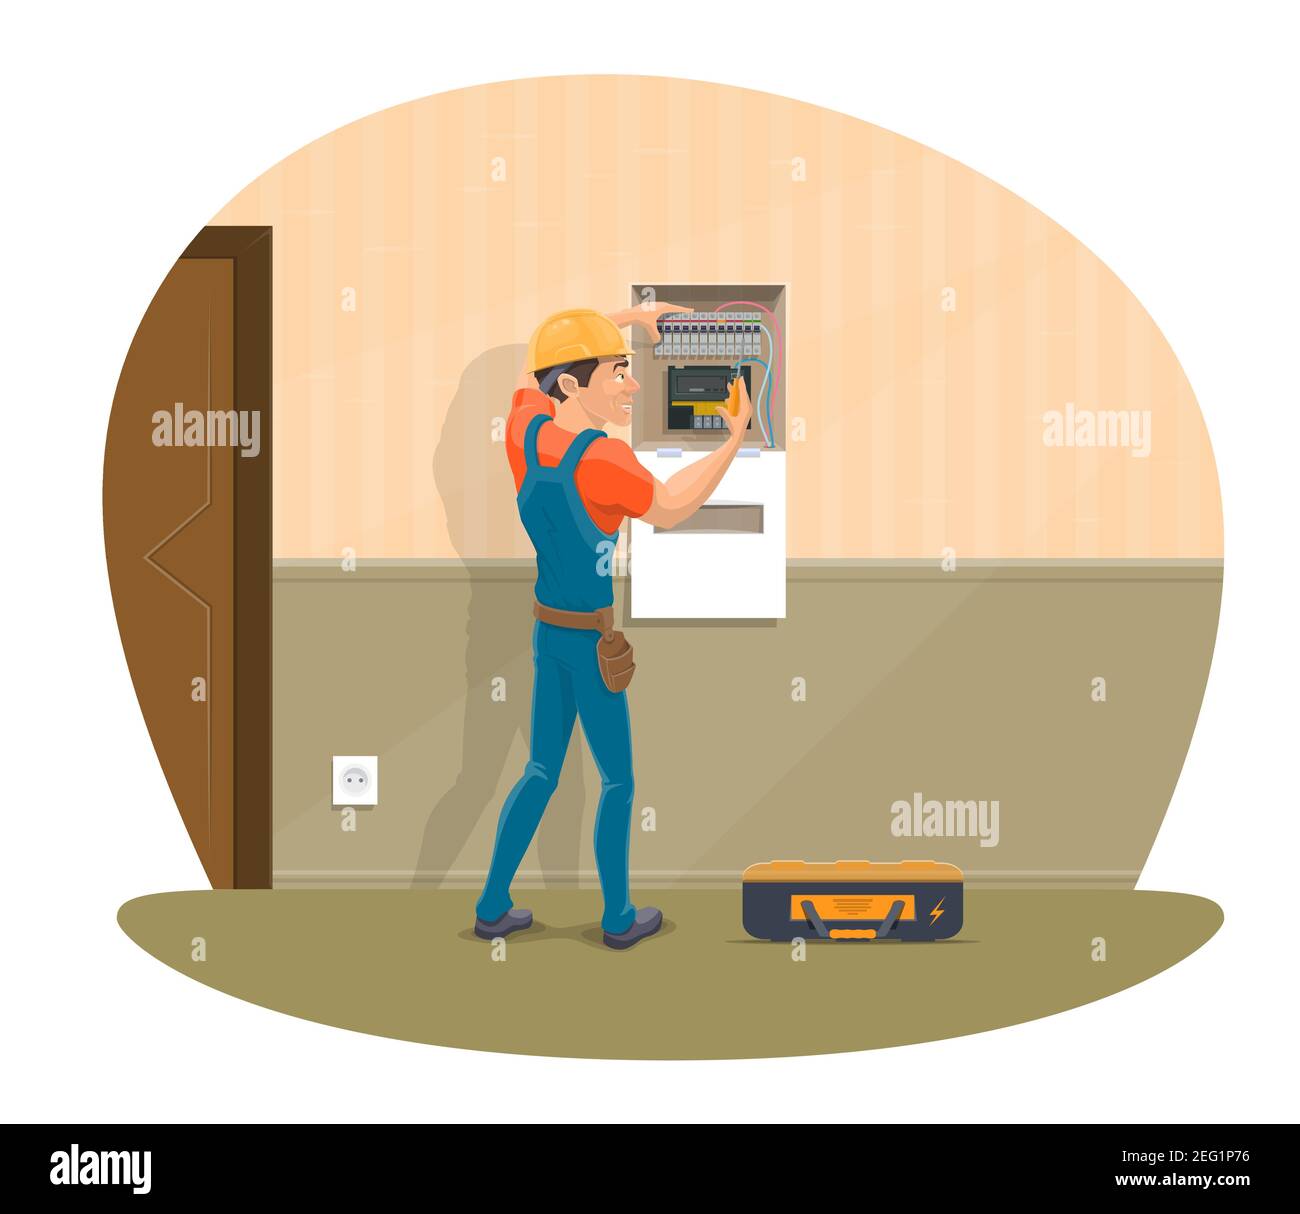 Electrician at work repairing home electricity with electrical work tools. Vector flat design of electircian man profession, changing fuse or wires an Stock Vector